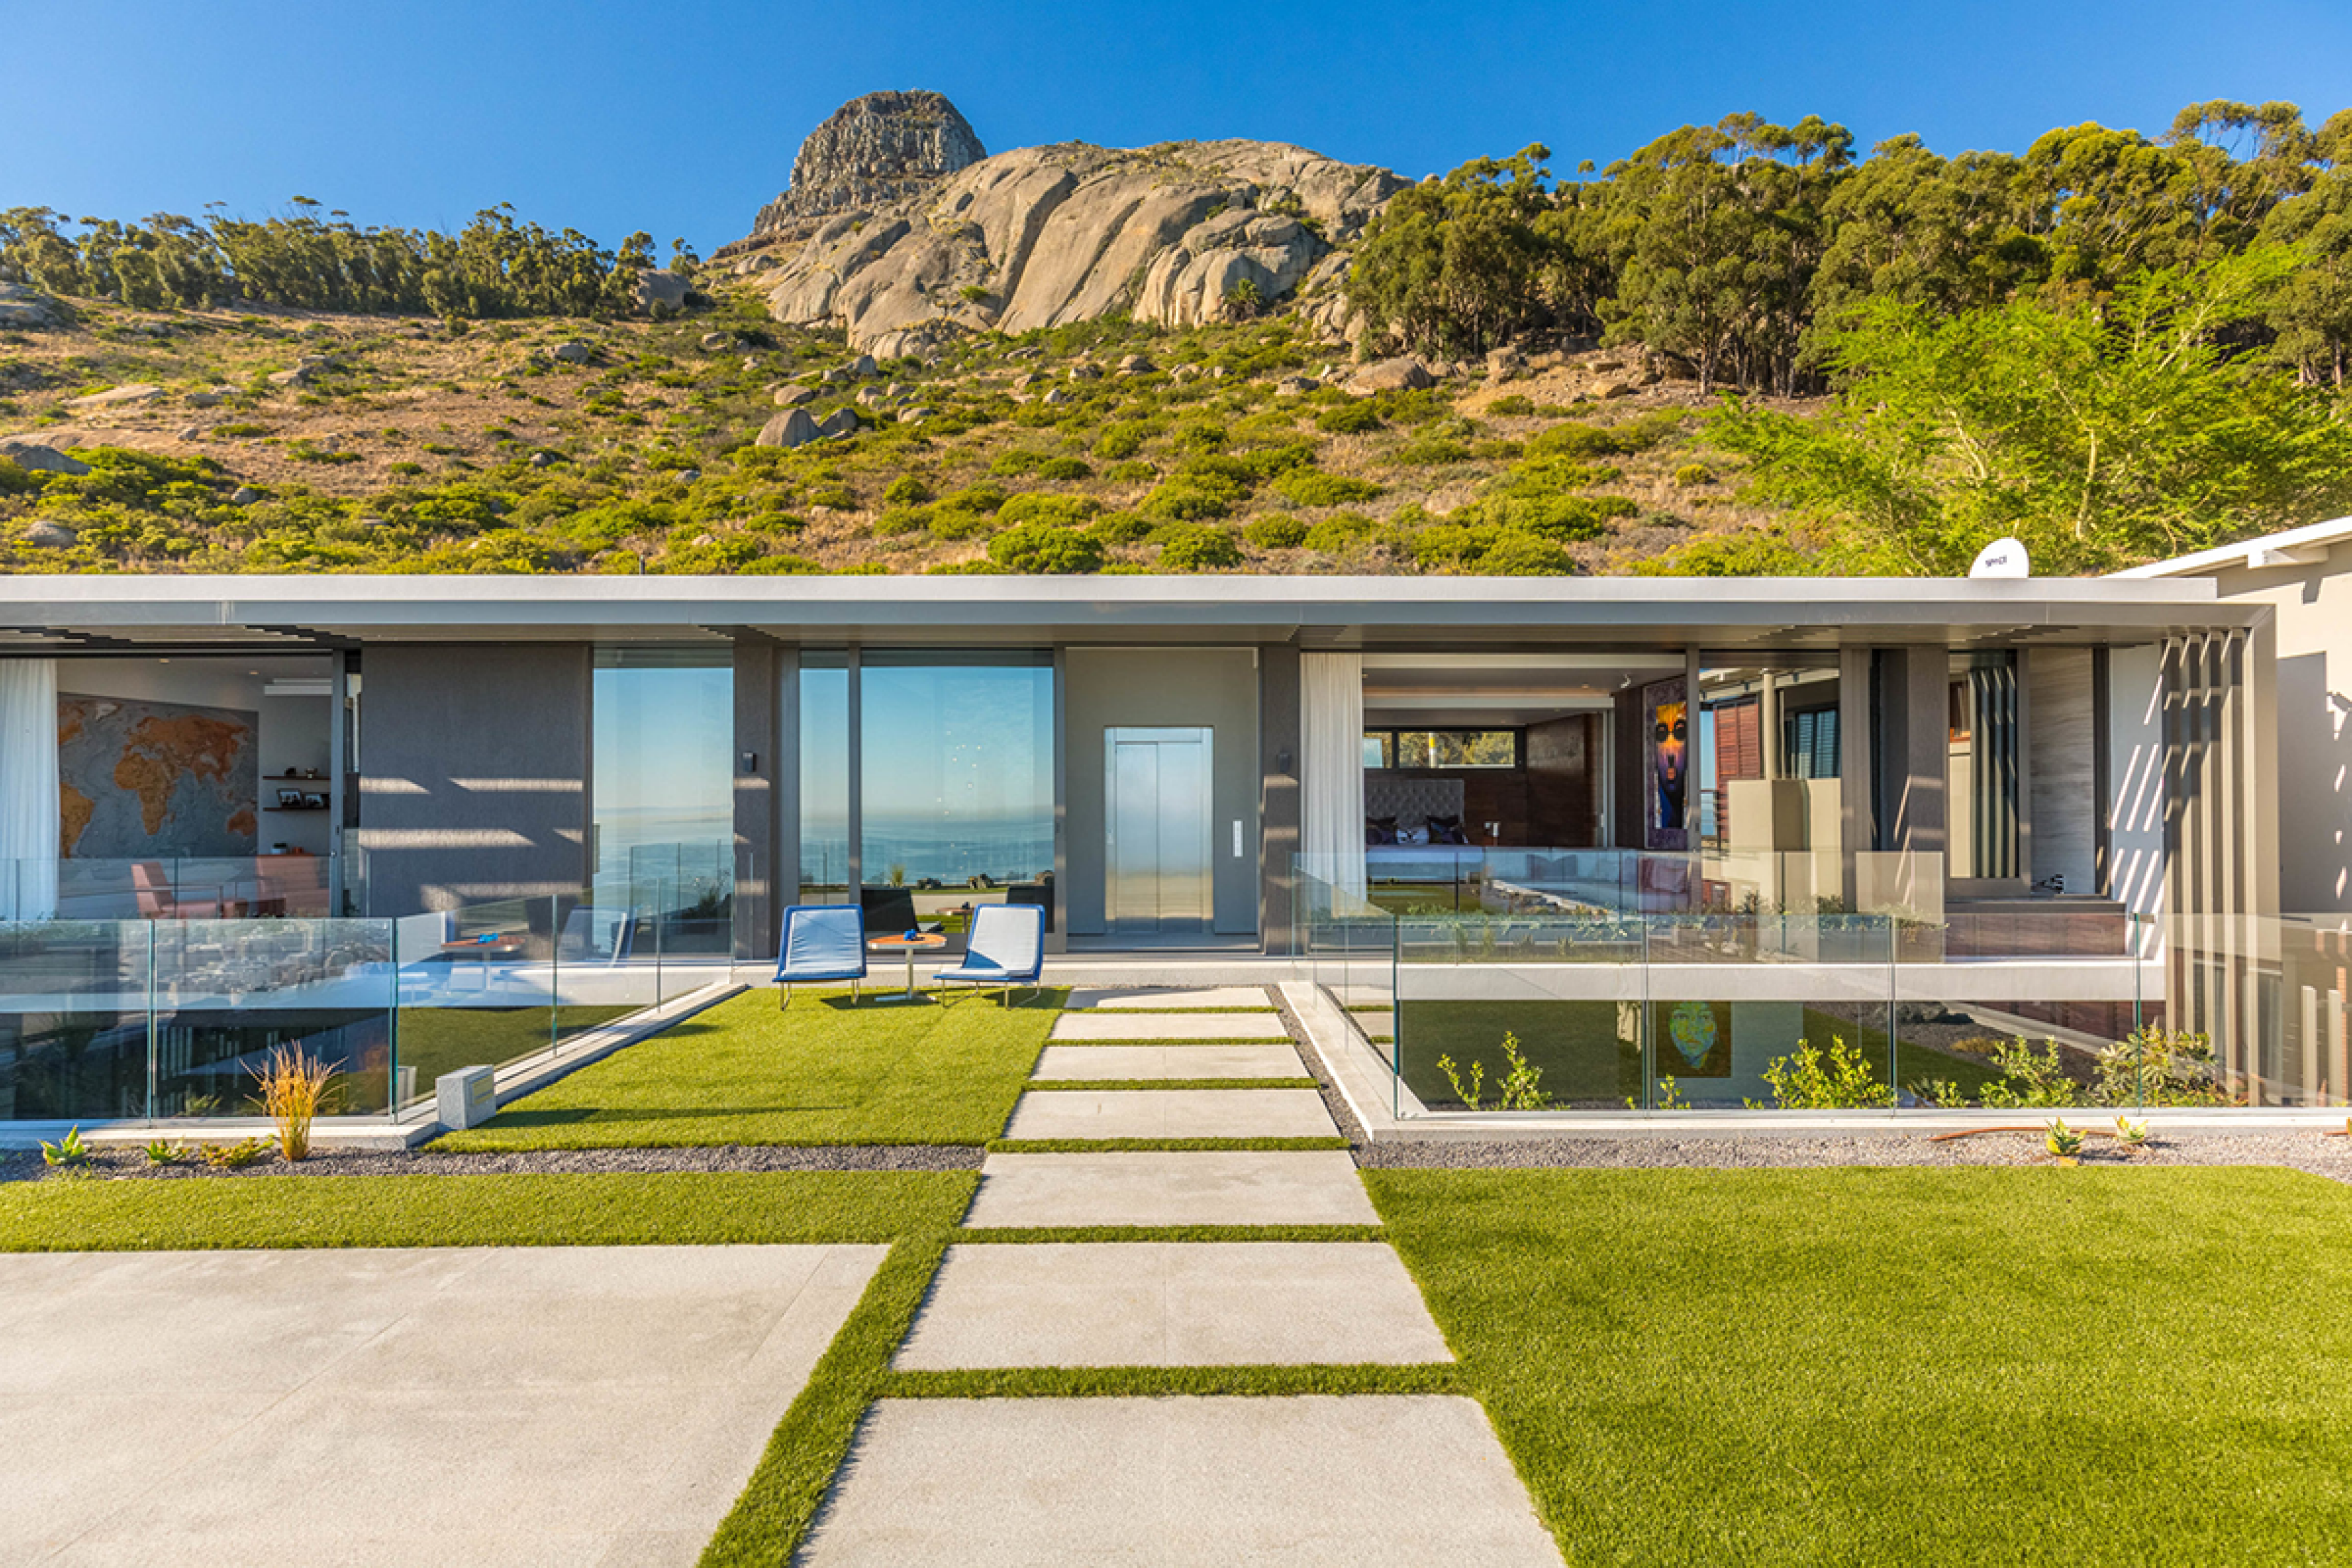 villa with a stone pathway set into a hillside